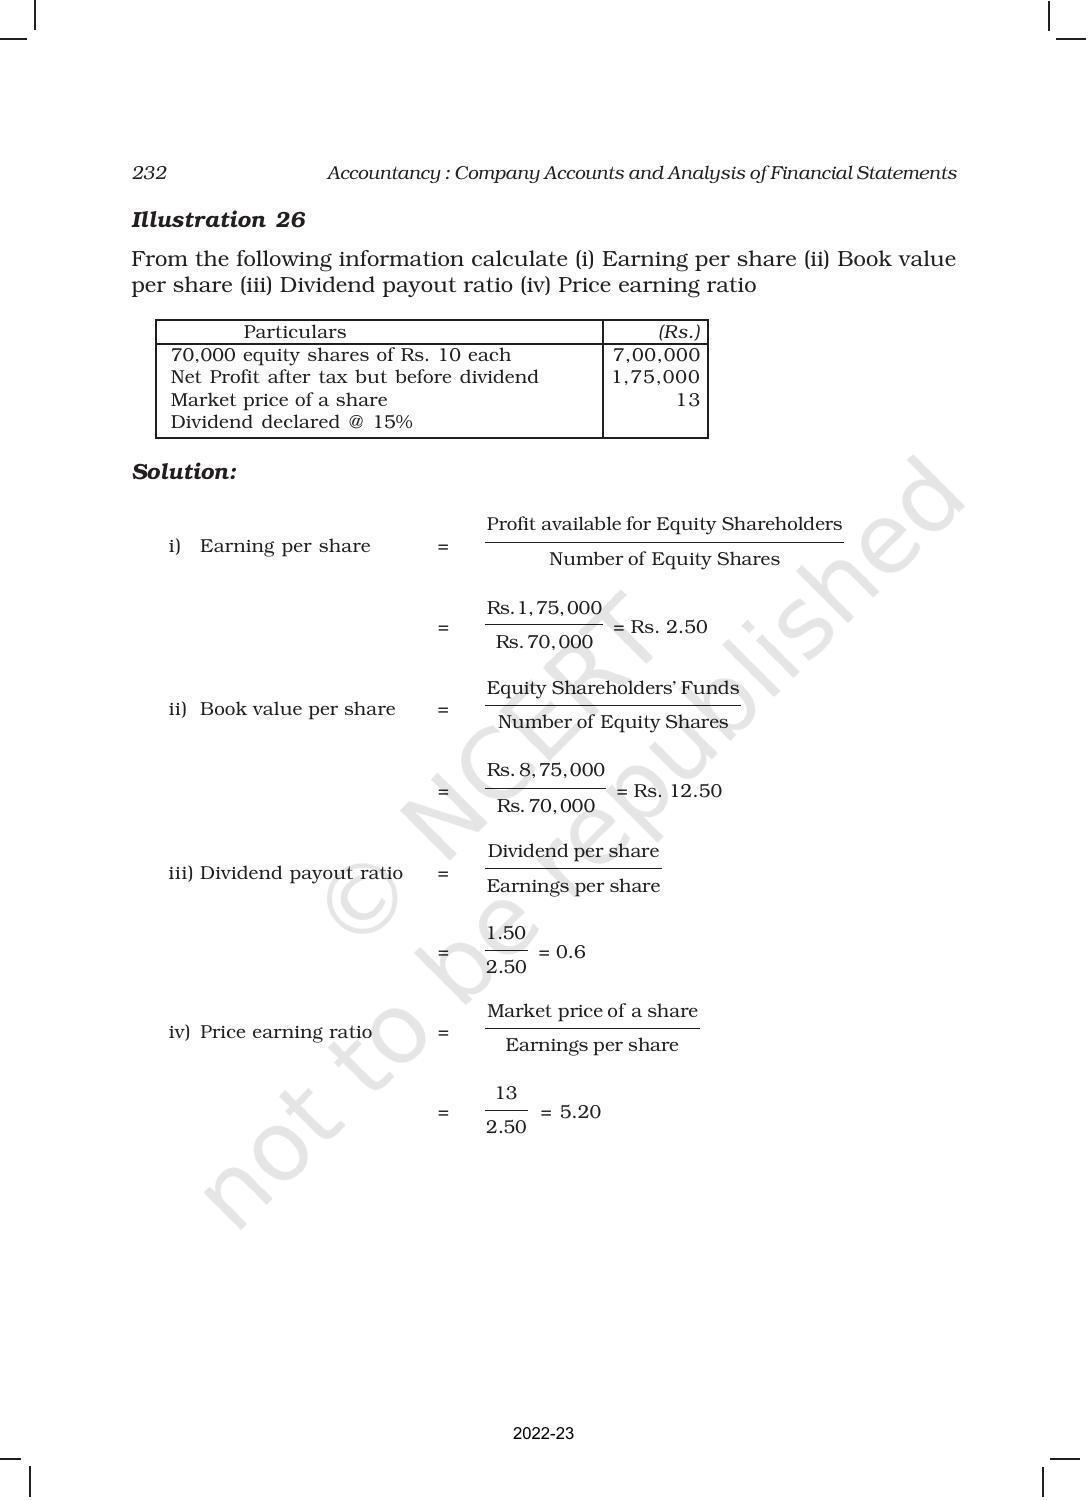 NCERT Book for Class 12 Accountancy Part II Chapter 5 Accounting Ratios - Page 39